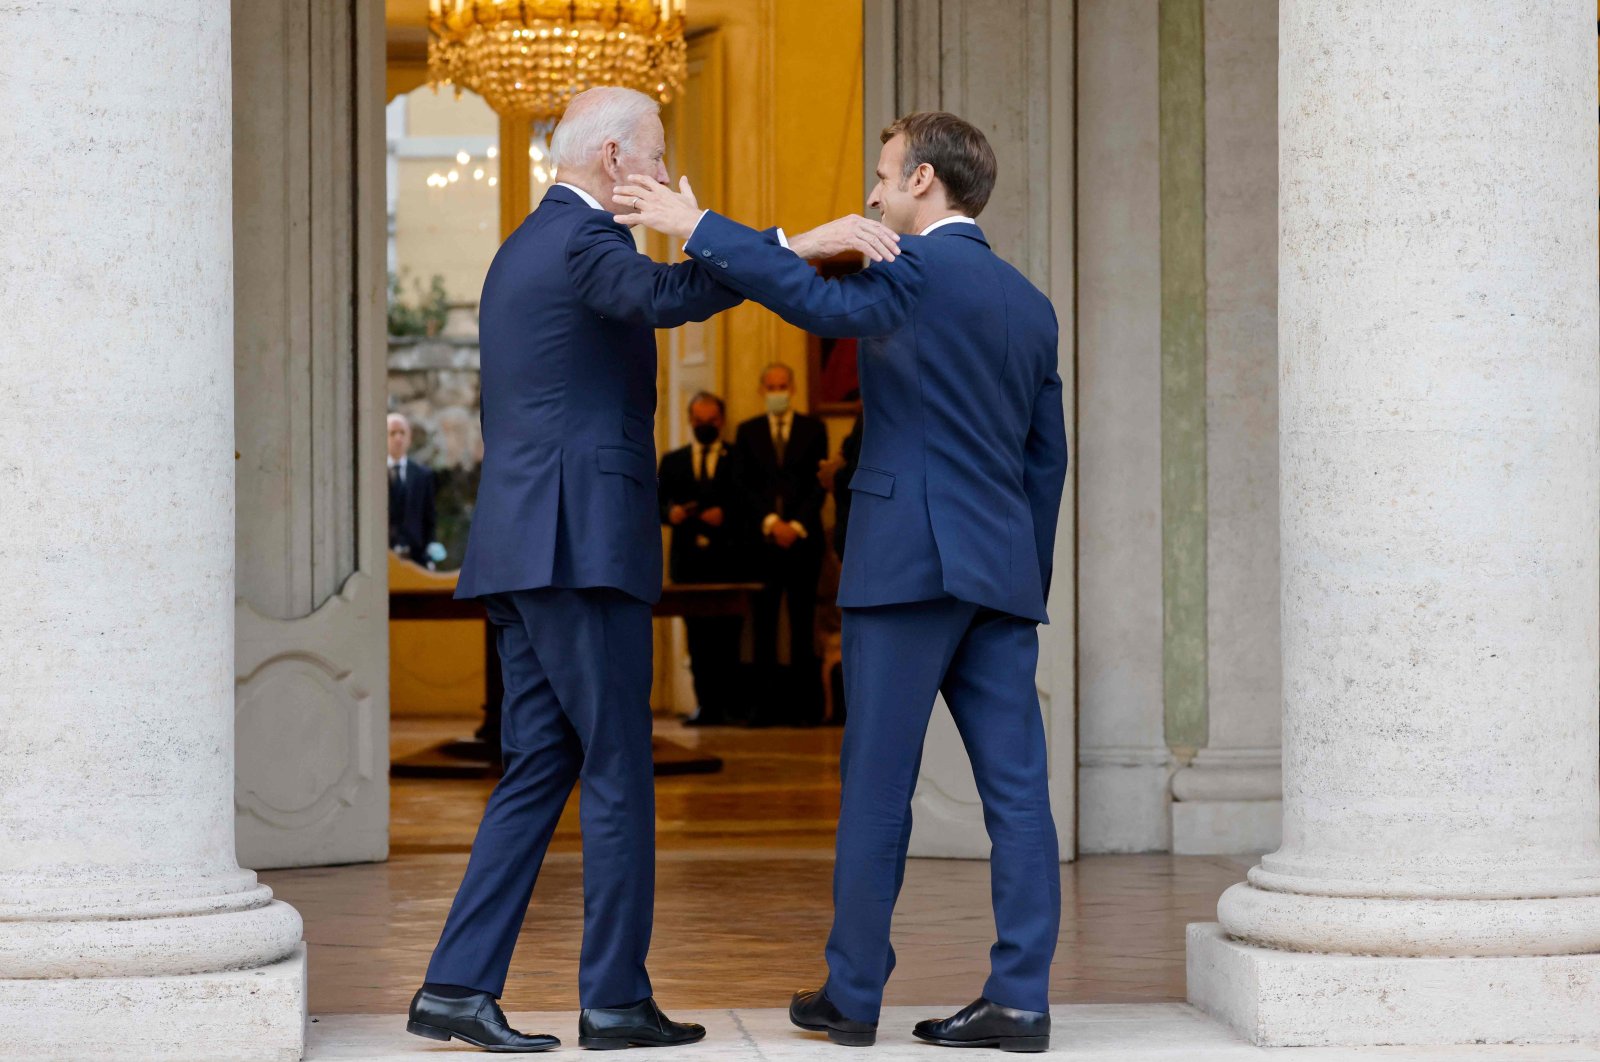 French President Emmanuel Macron (R) welcomes US President Joe Biden (L) before their meeting at the French Embassy to the Vatican in Rome, Oct. 29, 2021. (AFP Photo)